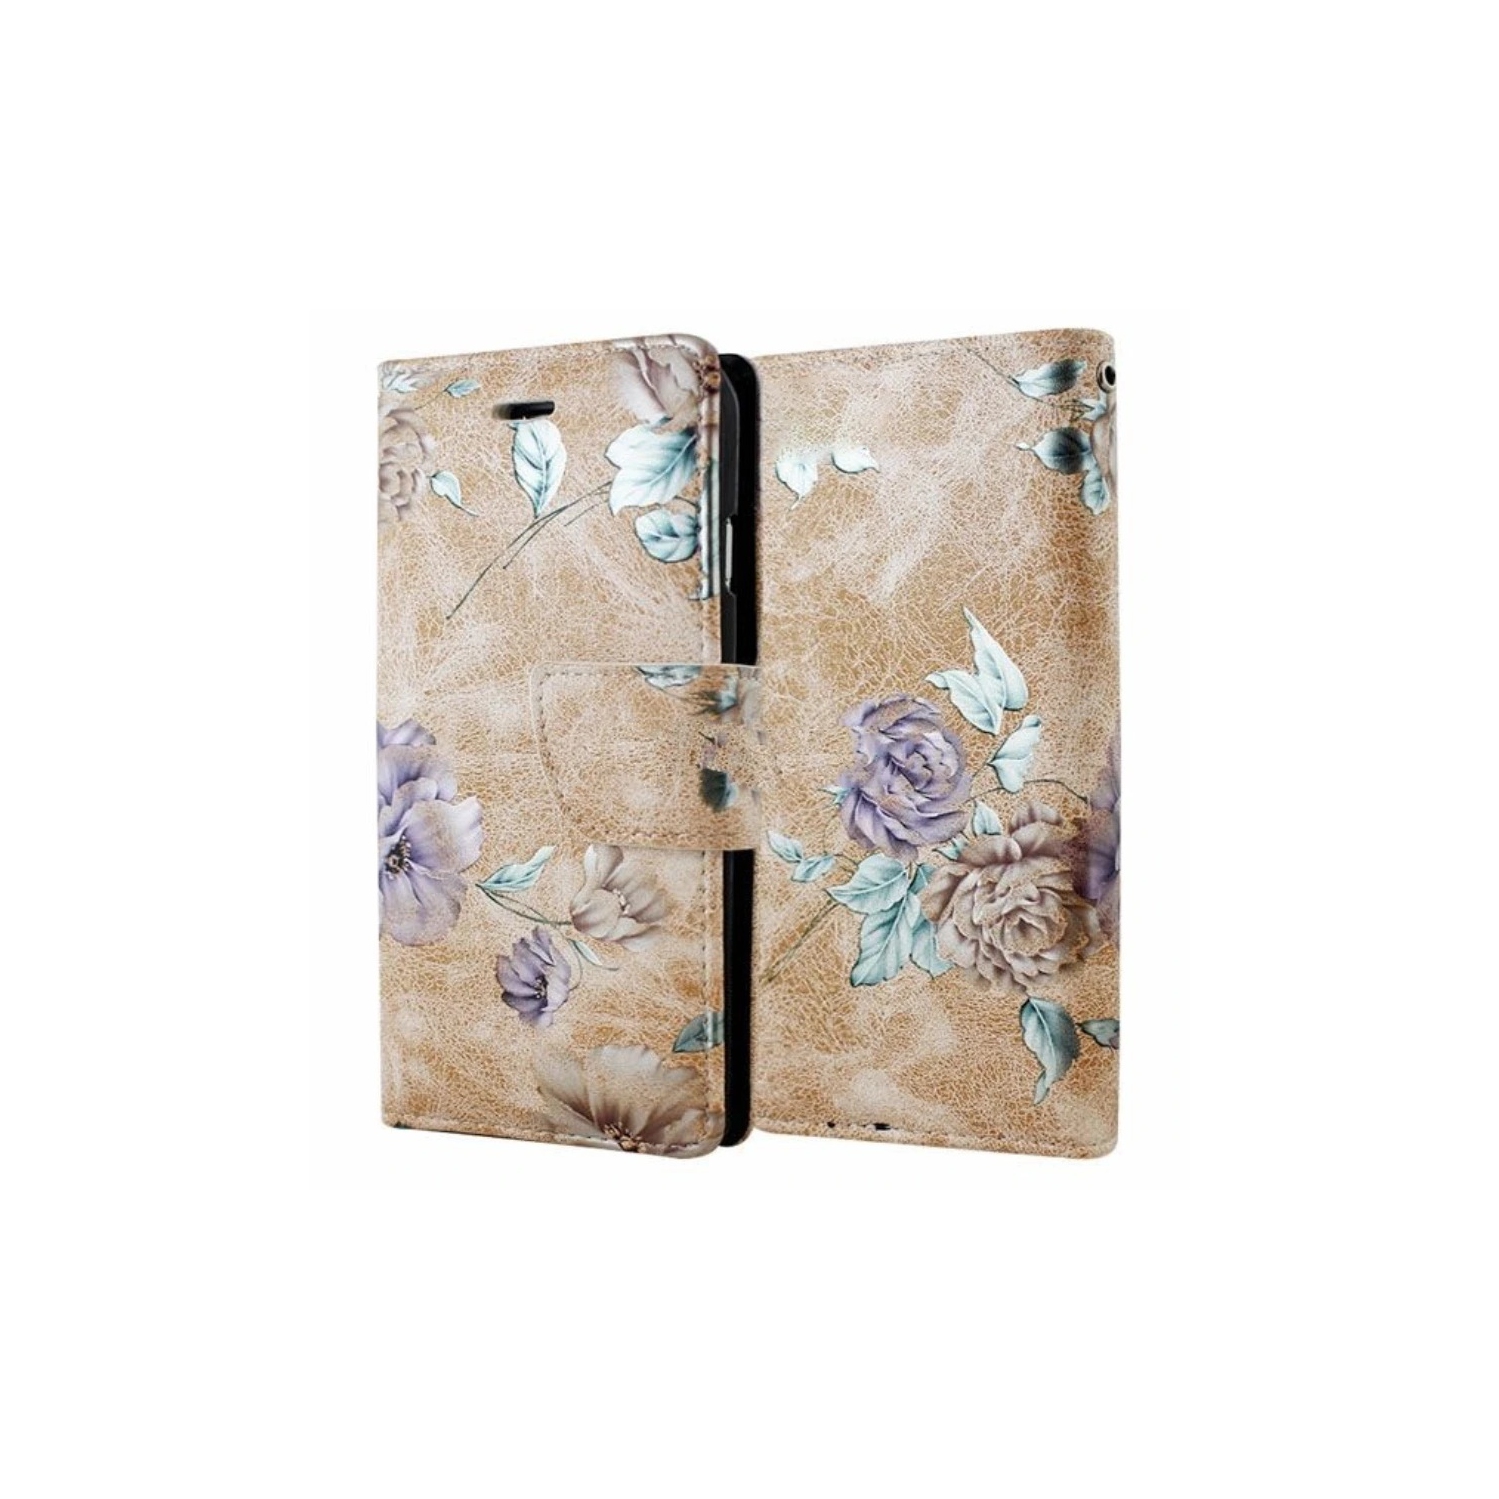 【CSmart】 Magnetic Card Slot Leather Folio Wallet Flip Case Cover for Samsung Galaxy A12 / M12 / F12, Beige Flower